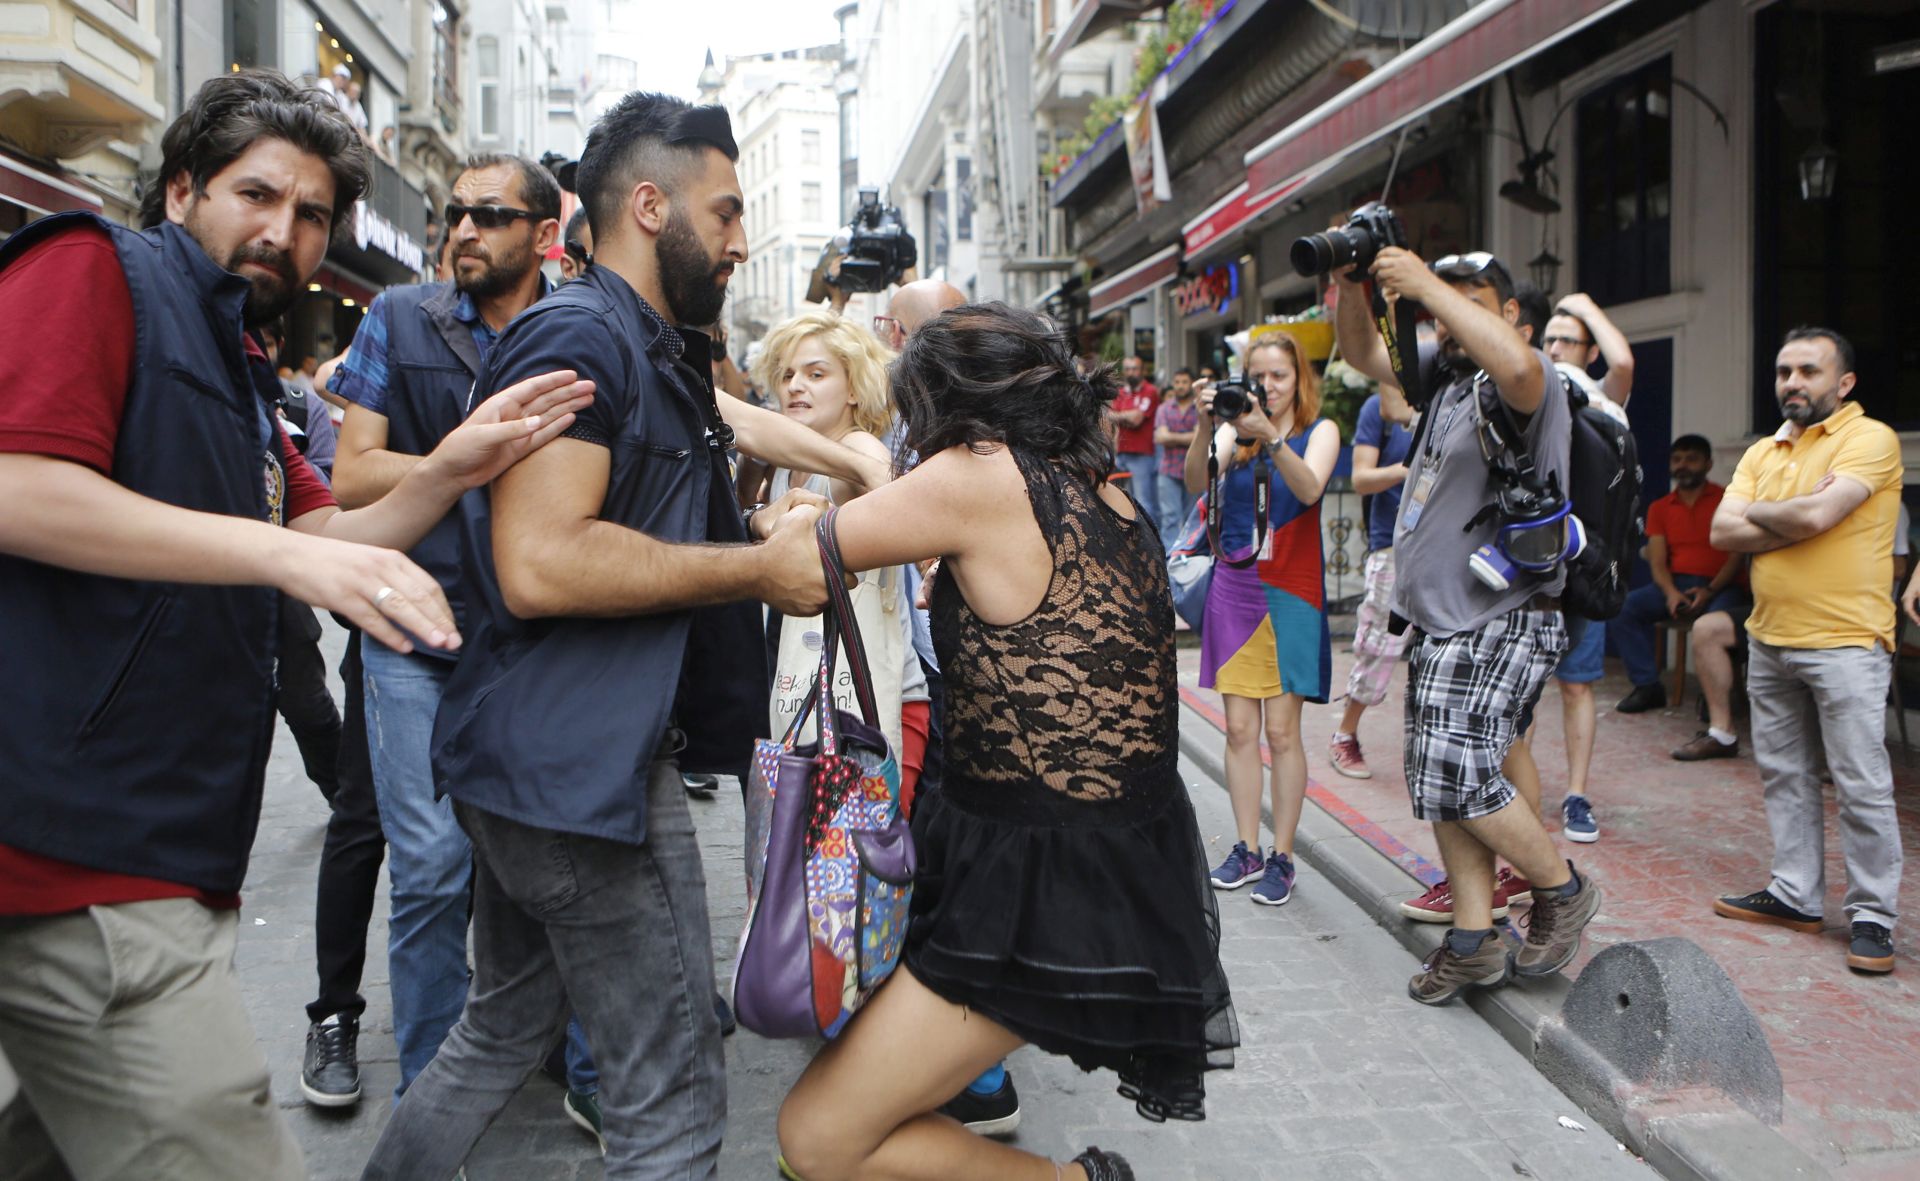 epa05392667 A participant is arrested by Turkish police during Istanbul LGTB Pride Parade which was cancelled due to security concerns by the governor of Istanbul, in Istanbul, Turkey, 26 June 2016. Transgenders people and supporters try to march in central Istanbul as part of the Trans Pride Week 2016, which is organized by Istanbul's 'Lesbians, Gays, Bisexuals, Transvestites and Transsexuals' (LGBT) solidarity organization.  EPA/CEM TURKEL